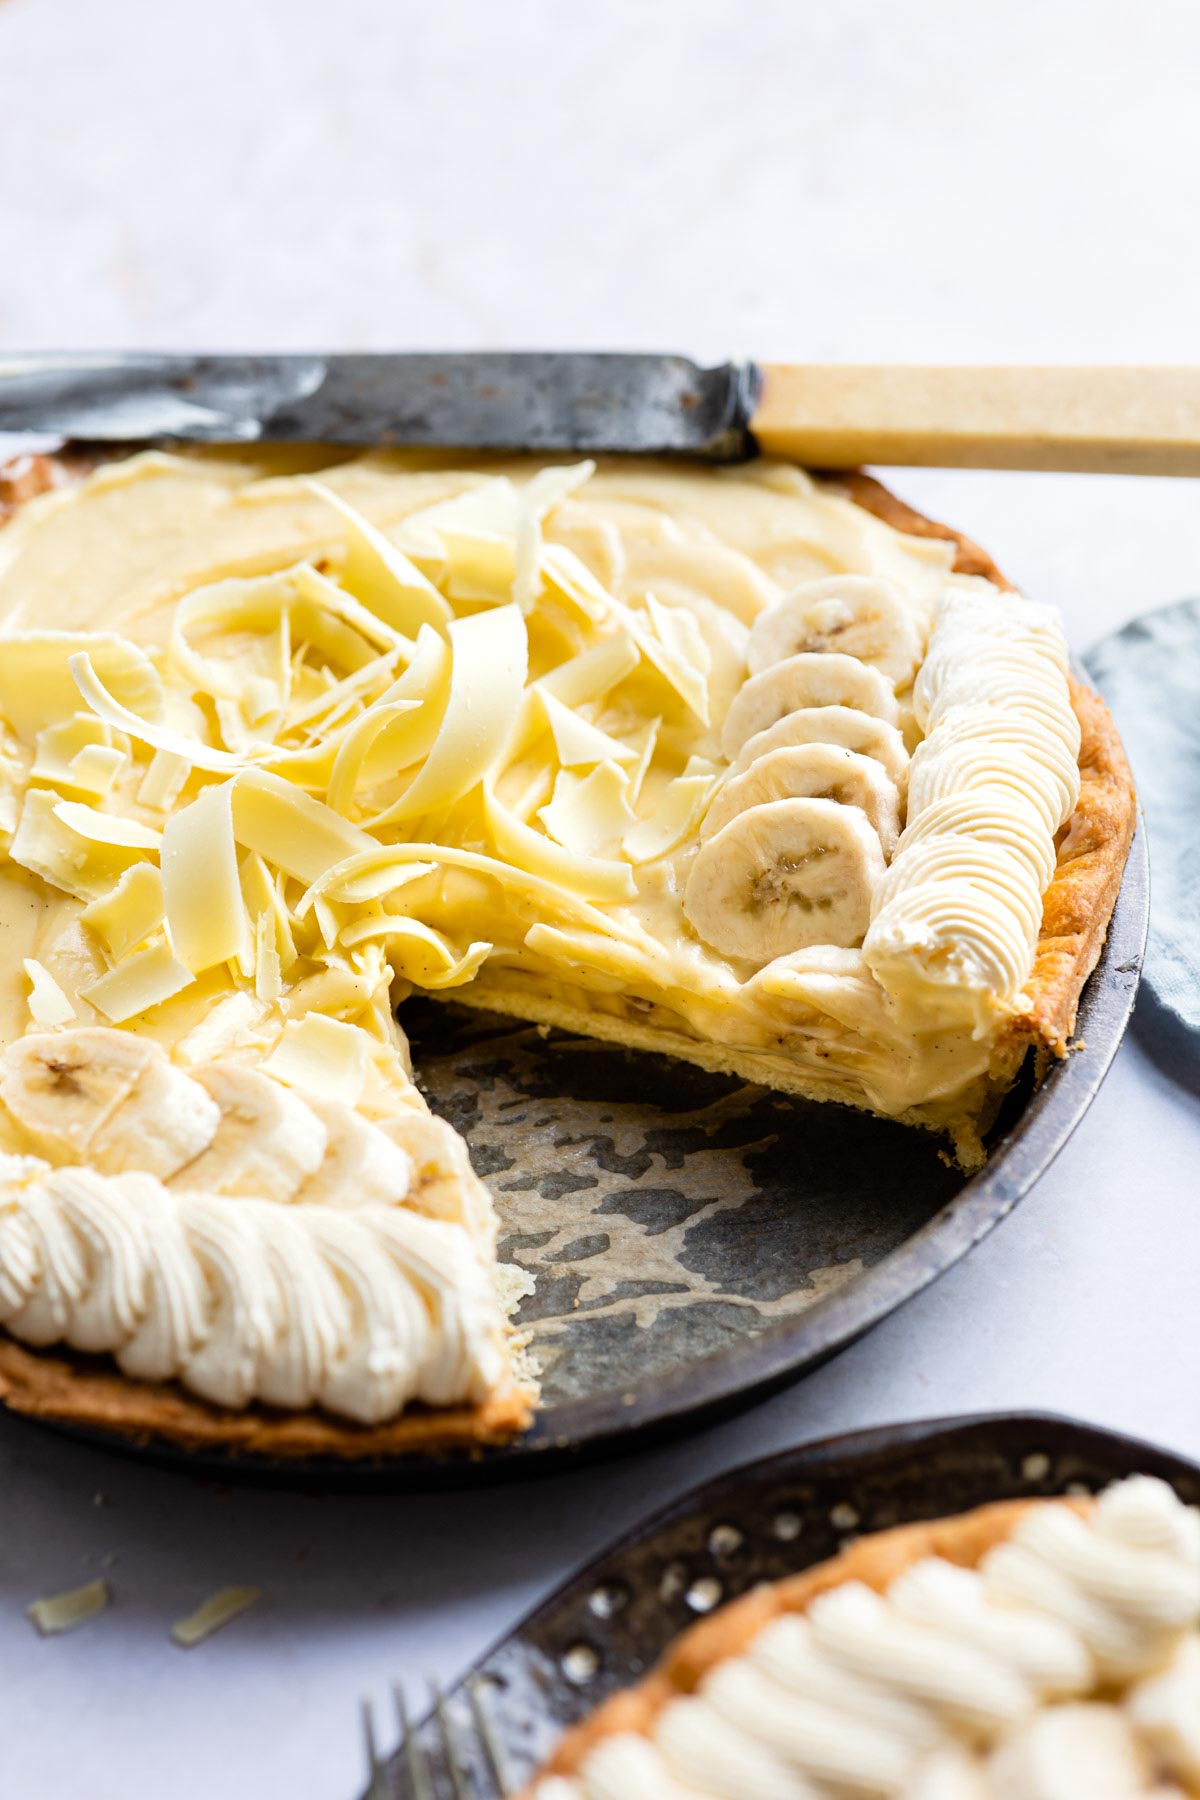 the finished banana cream pie with one slice removed